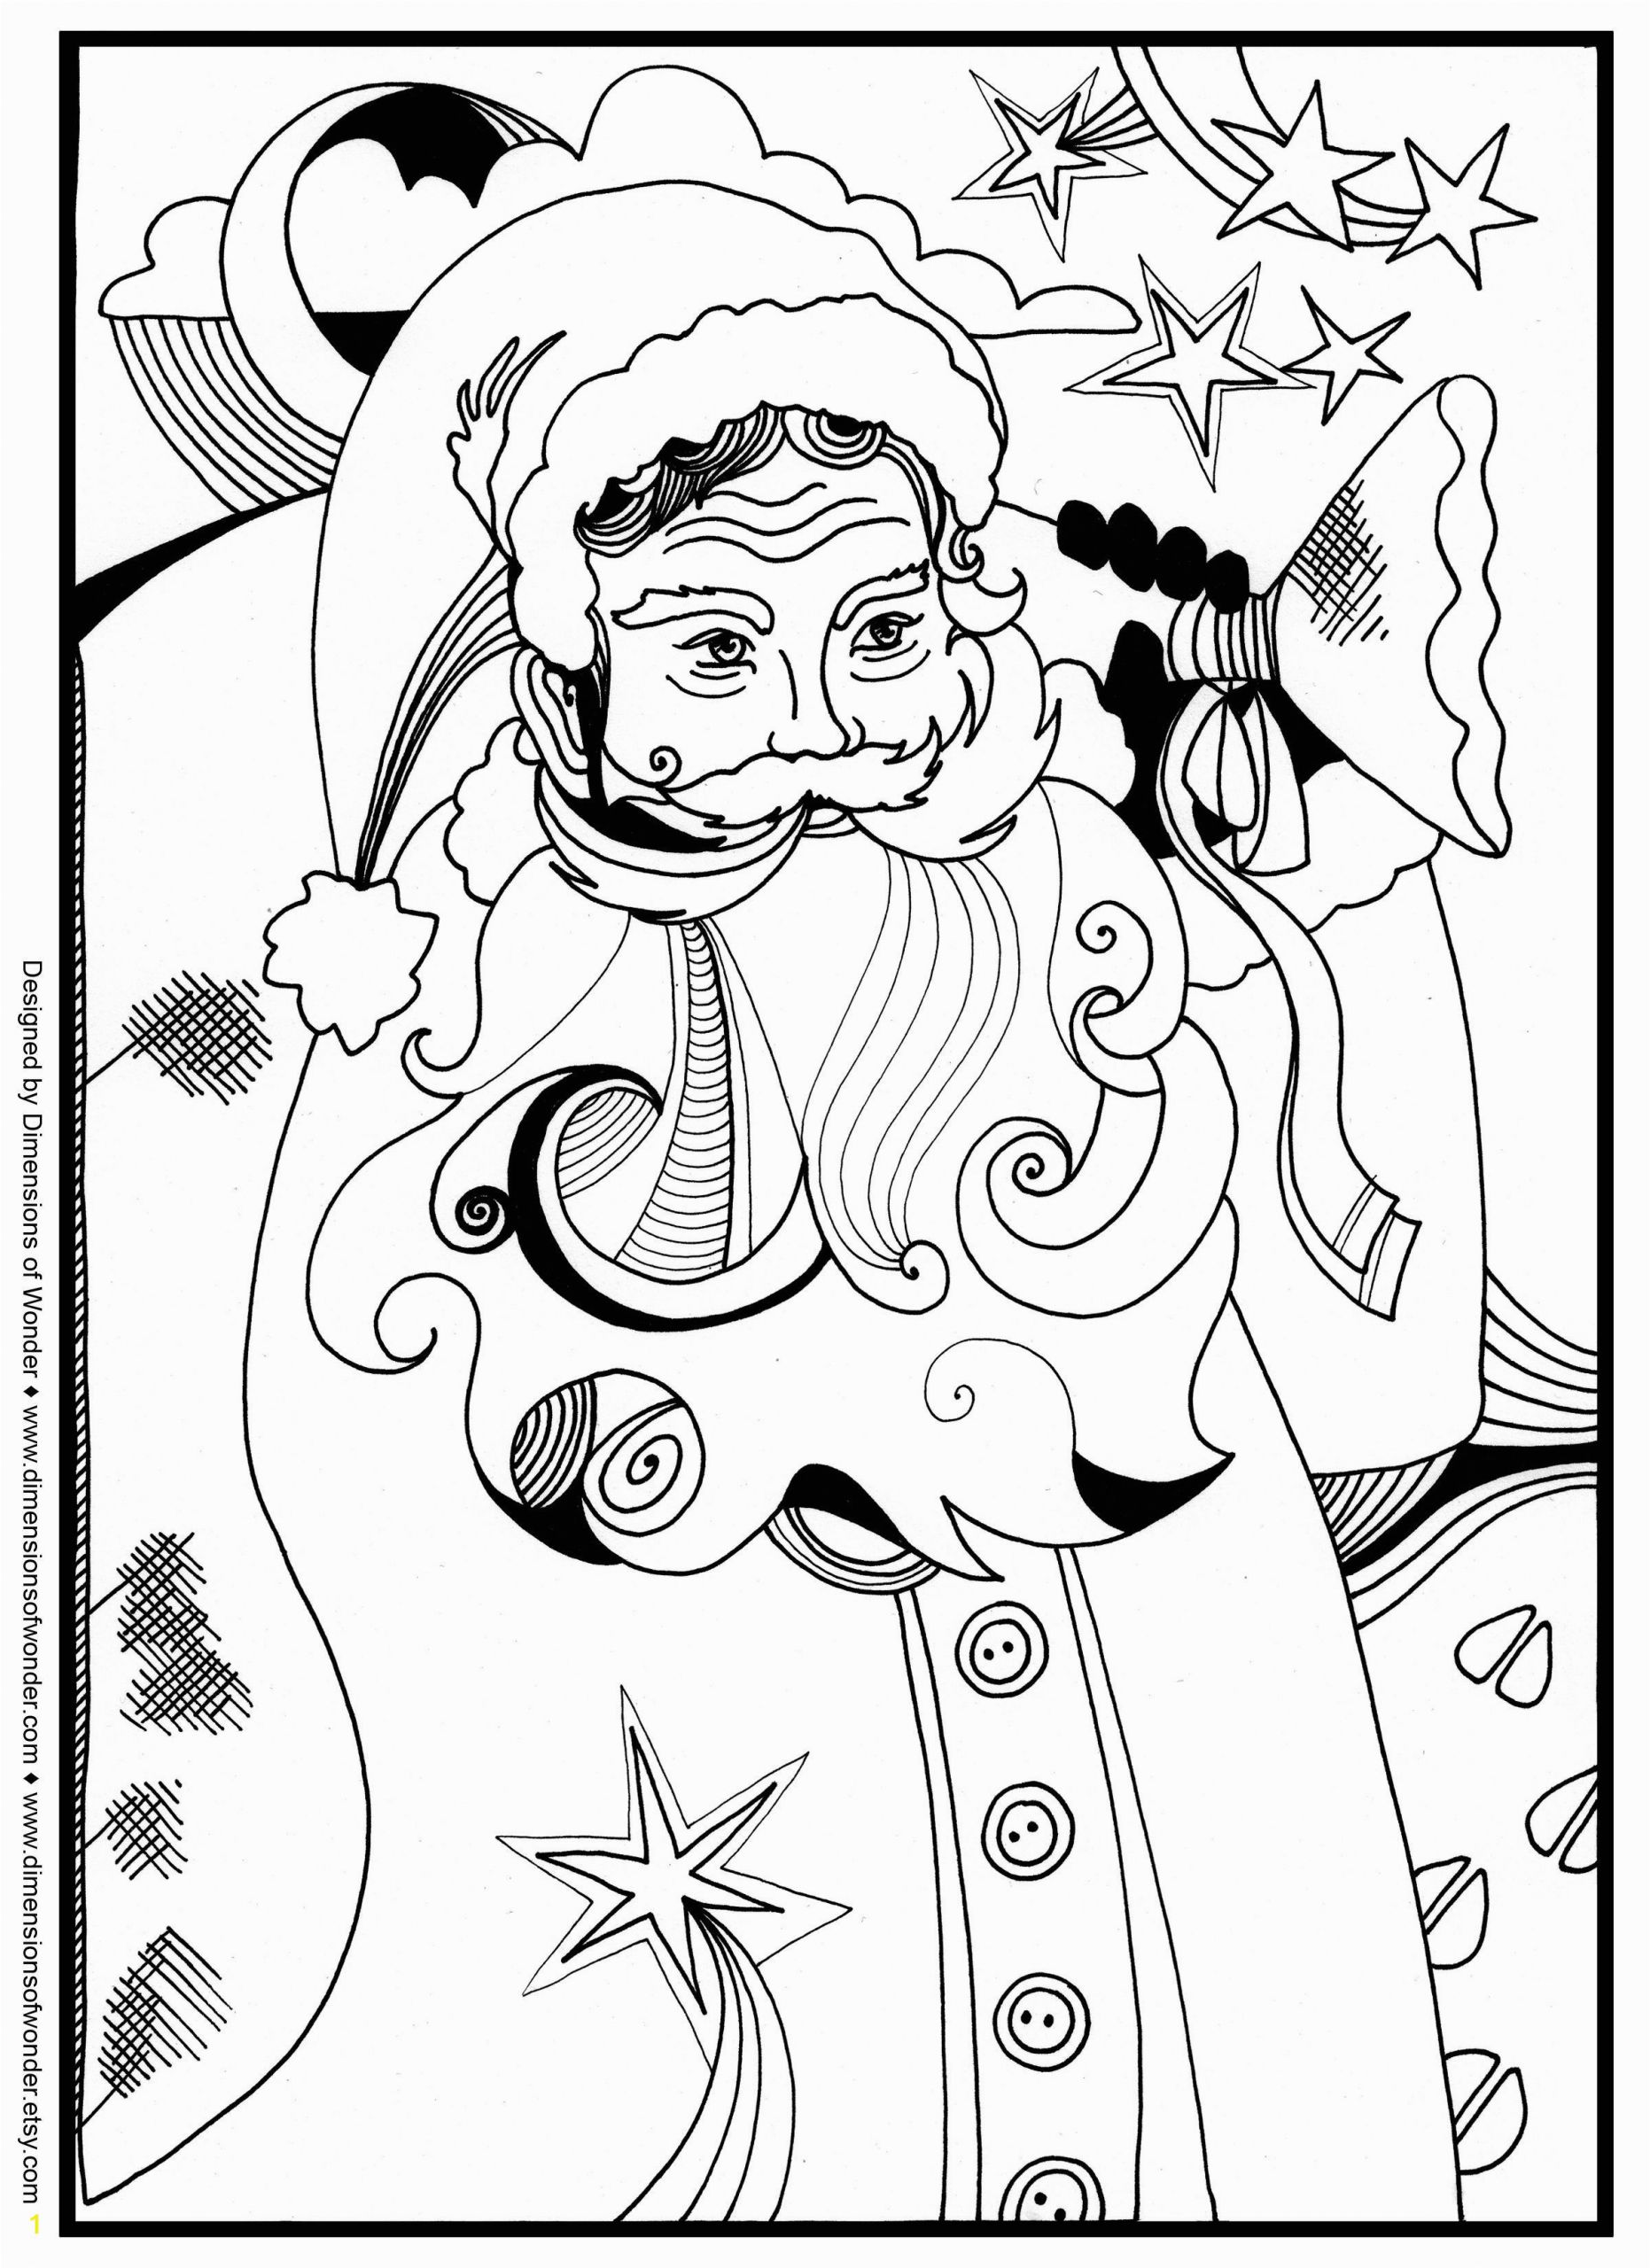 Free Printable Nativity Coloring Pages Santa Around the World Coloring Pages